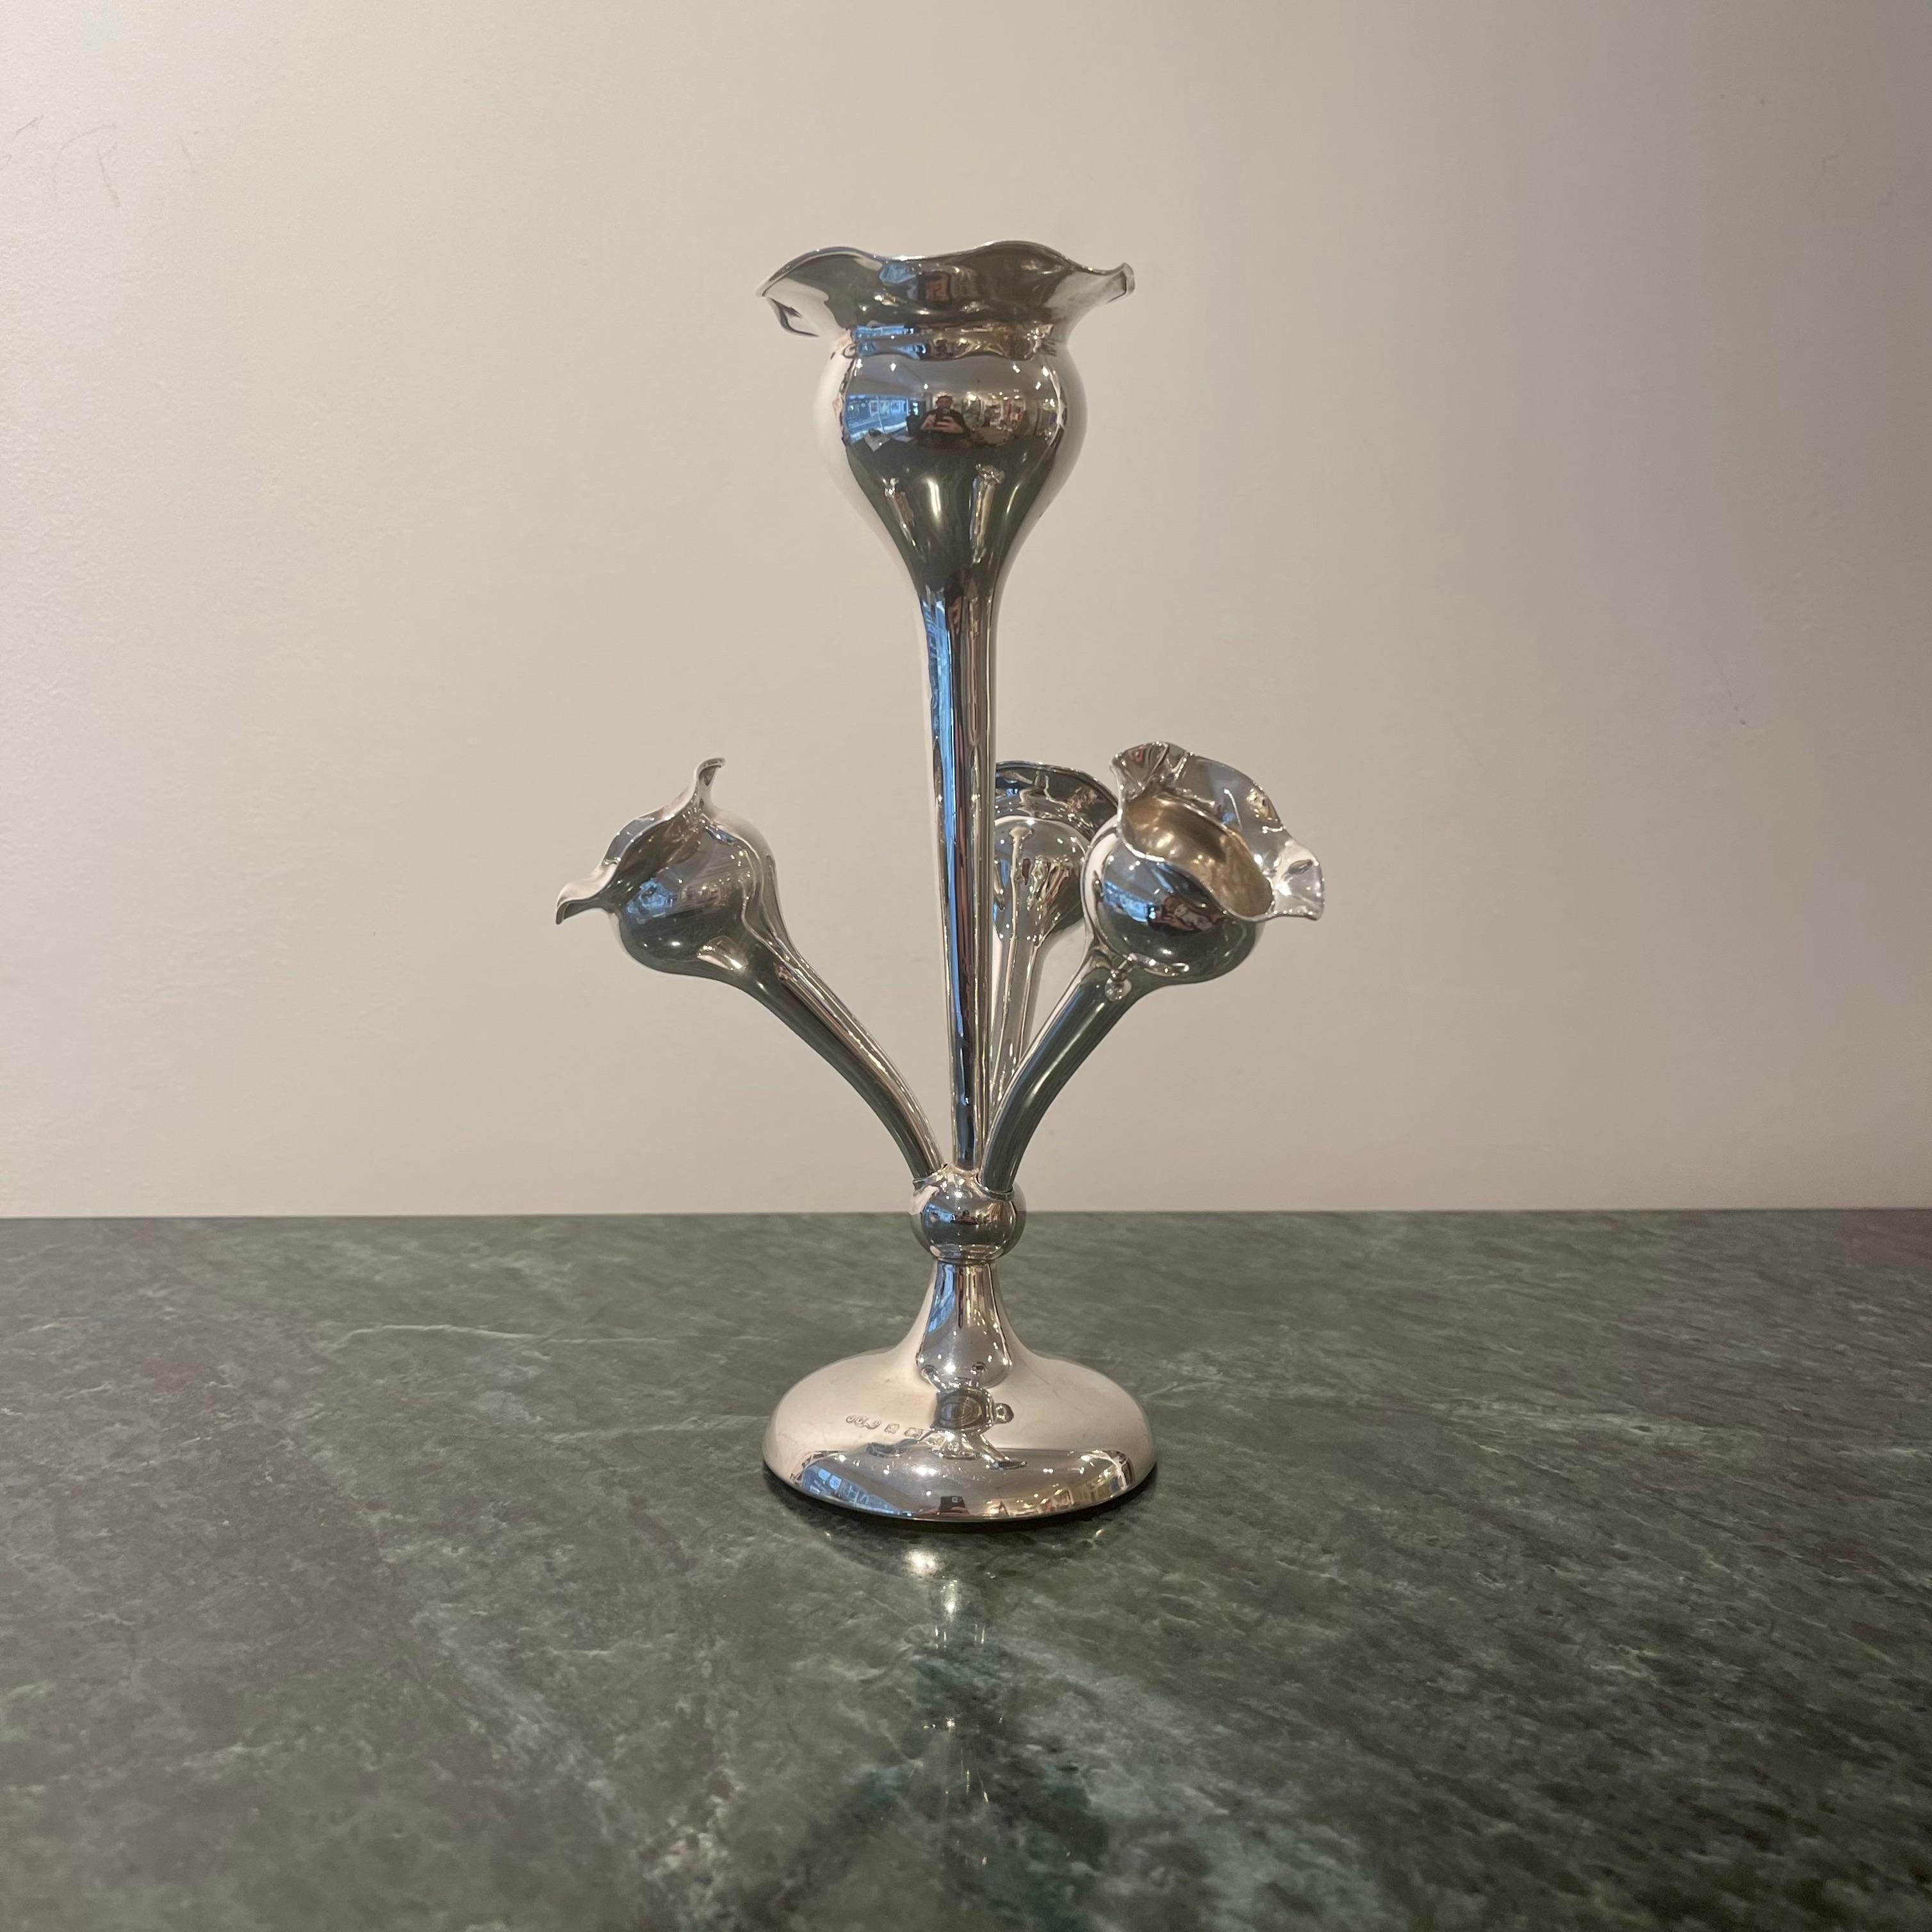 Characteristic of the centrepieces known as Epergnes, this medium-sized Sterling Silver Edwardian example is designed to display flowers in its blooming-lipped central trumpet vase and and three smaller radiating branches. The central stem is fixed,